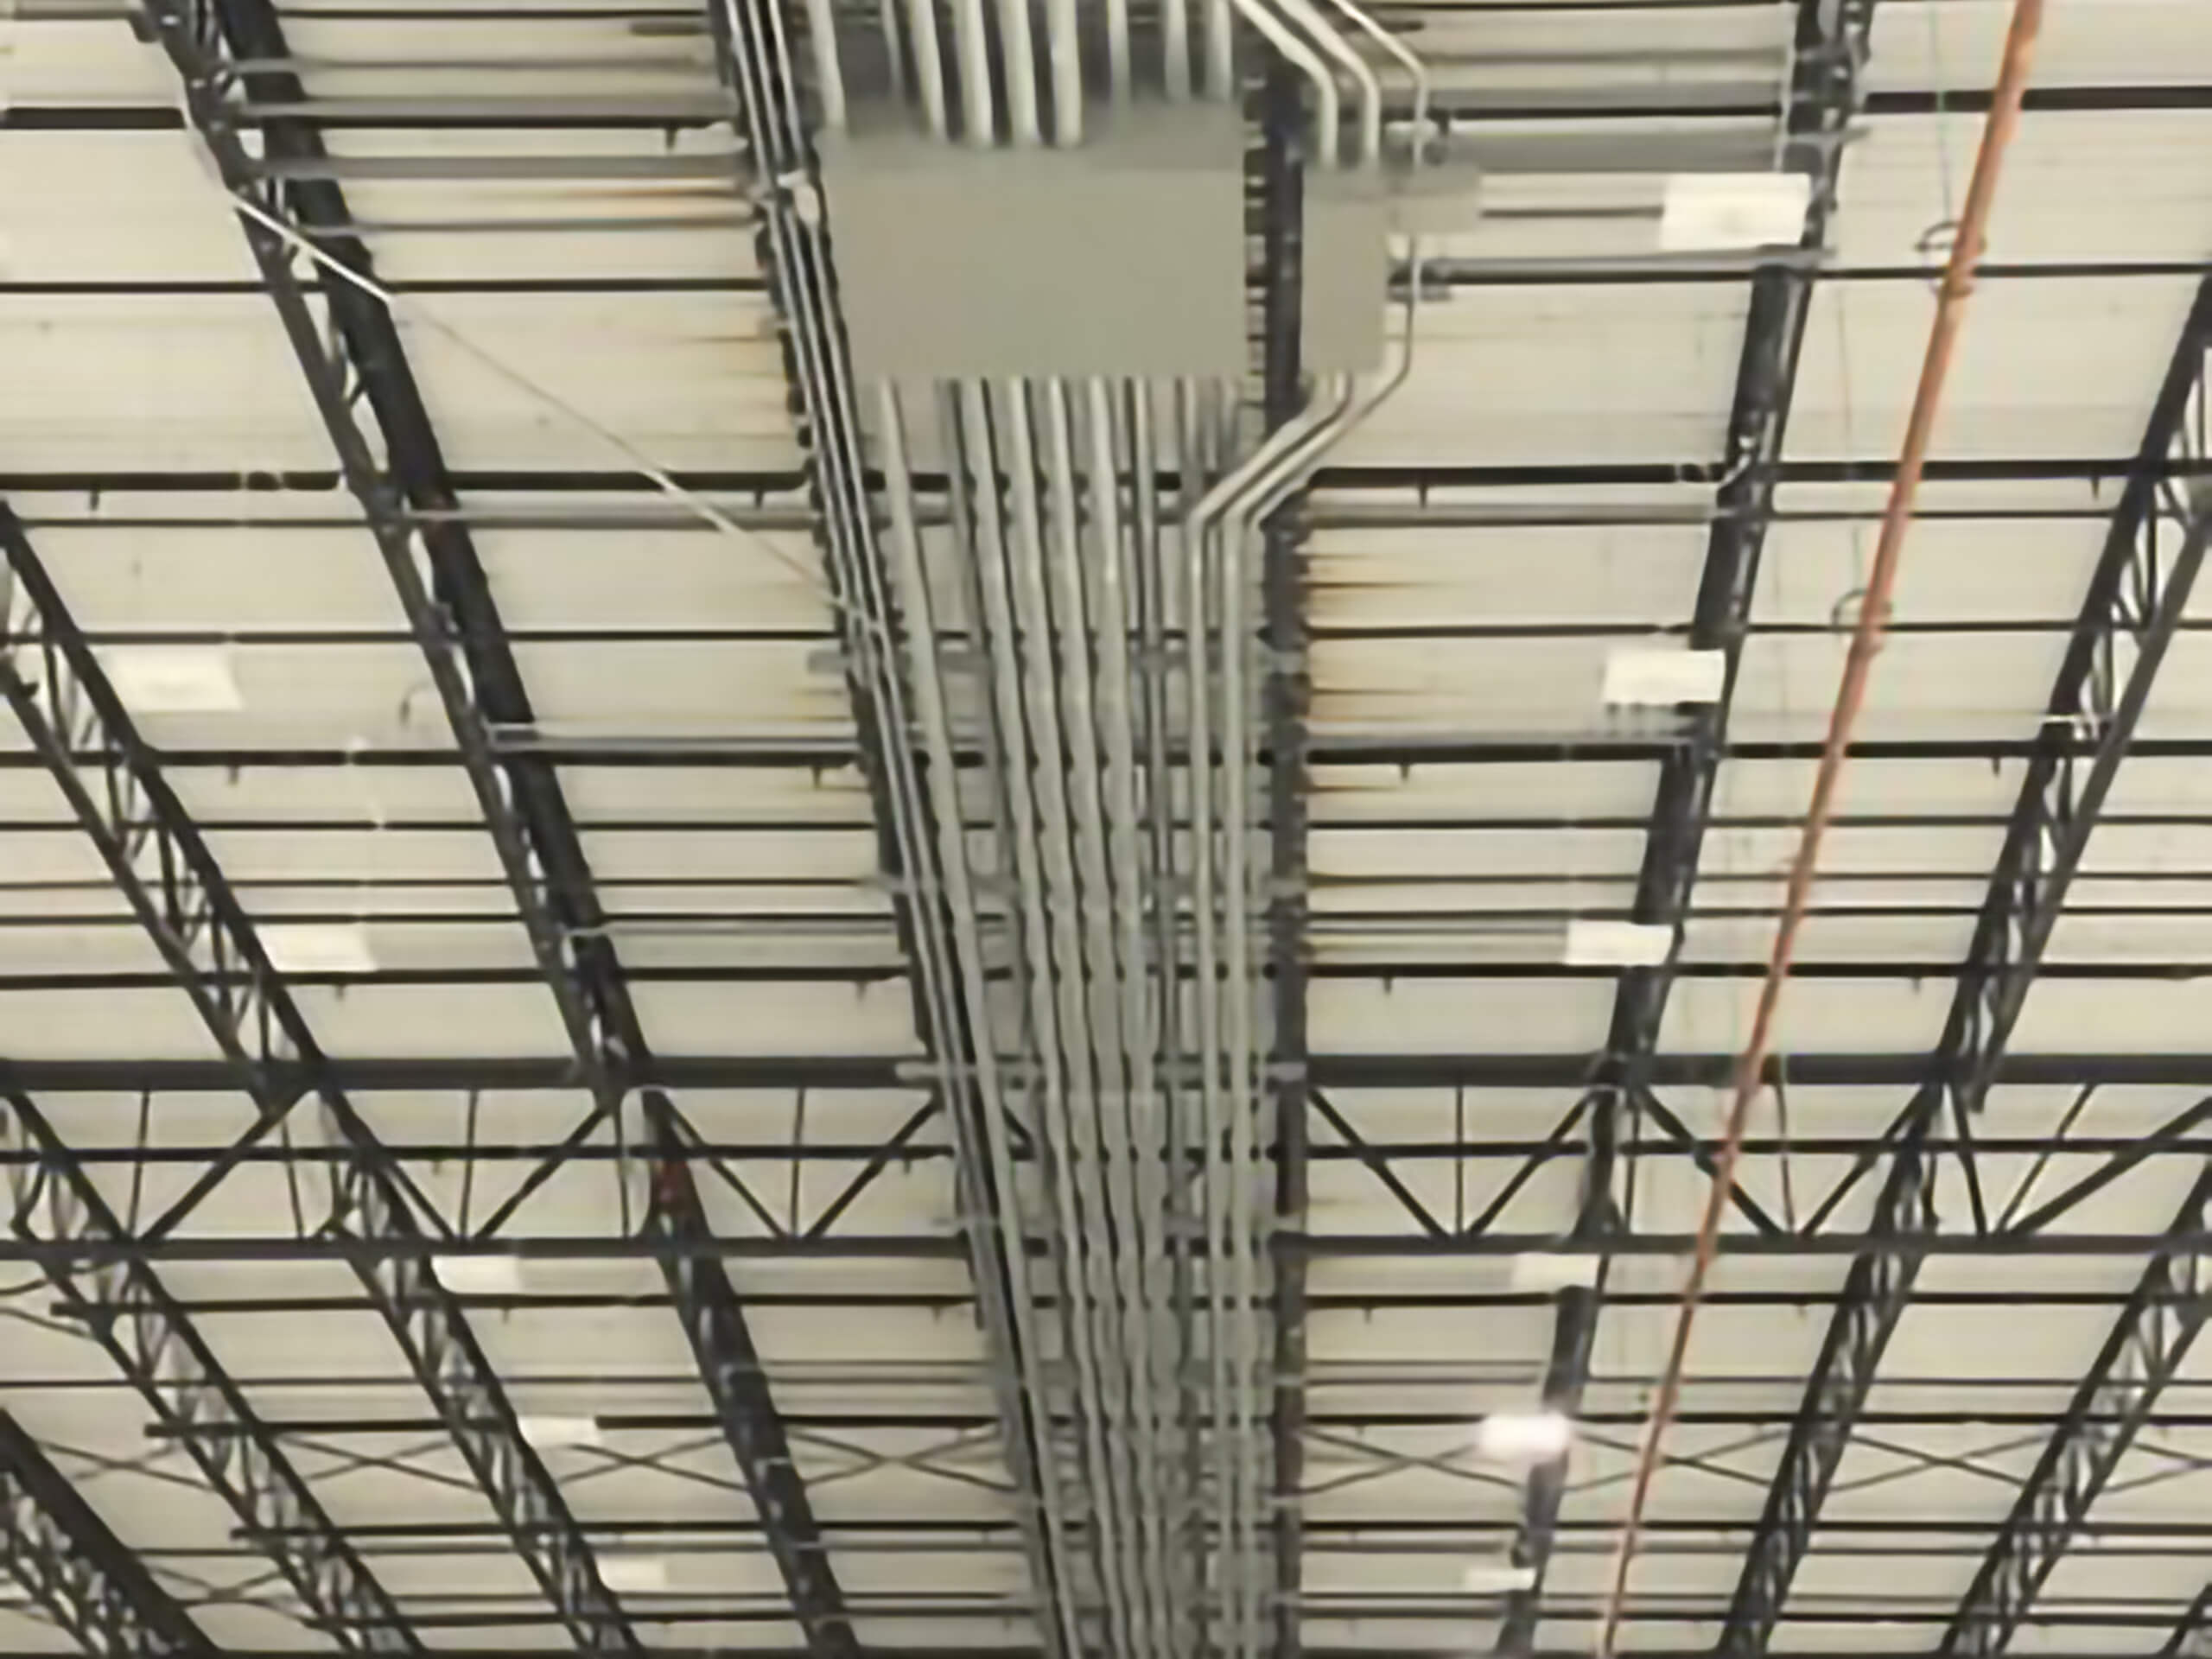 17000 ft of distribution conduit completed enterprise solutions